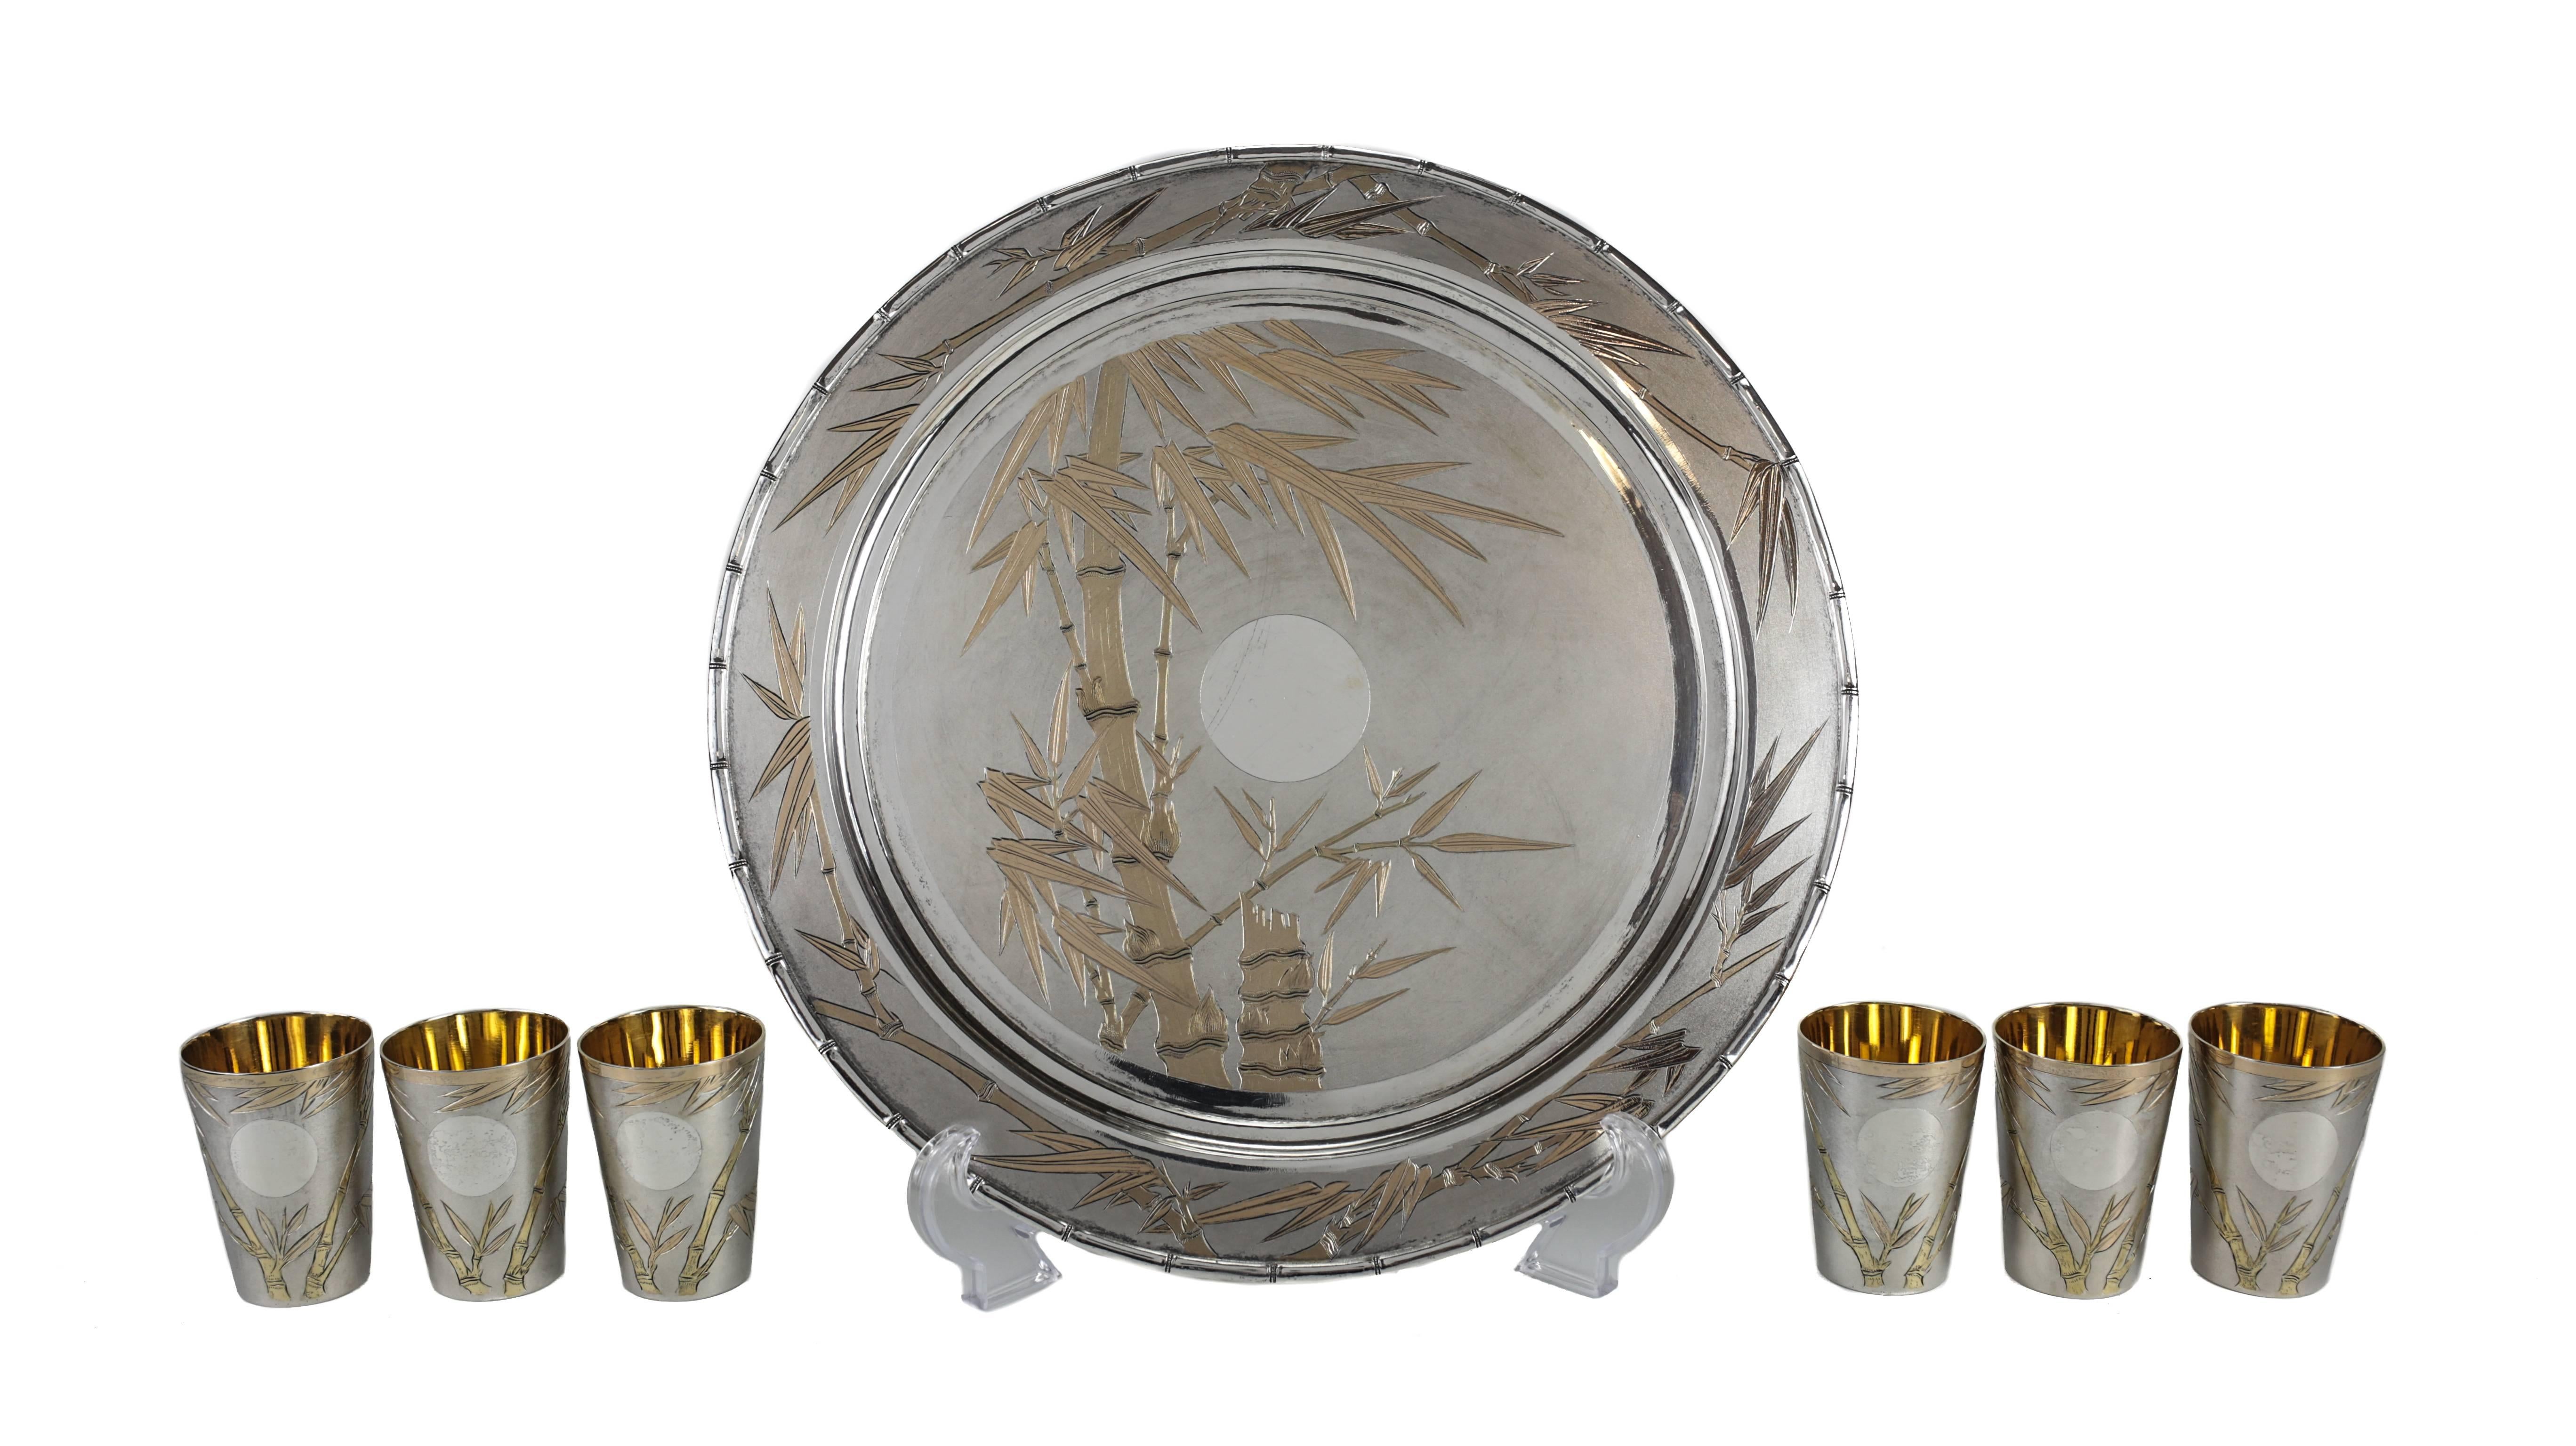 A Mid-Century decorative sake service from Japan consisting of a serving tray and six sake cups (shot glasses). The tray with a hand engraved night scene depicting a bamboo tree and moon, the border further engraved with a matching bamboo leaf